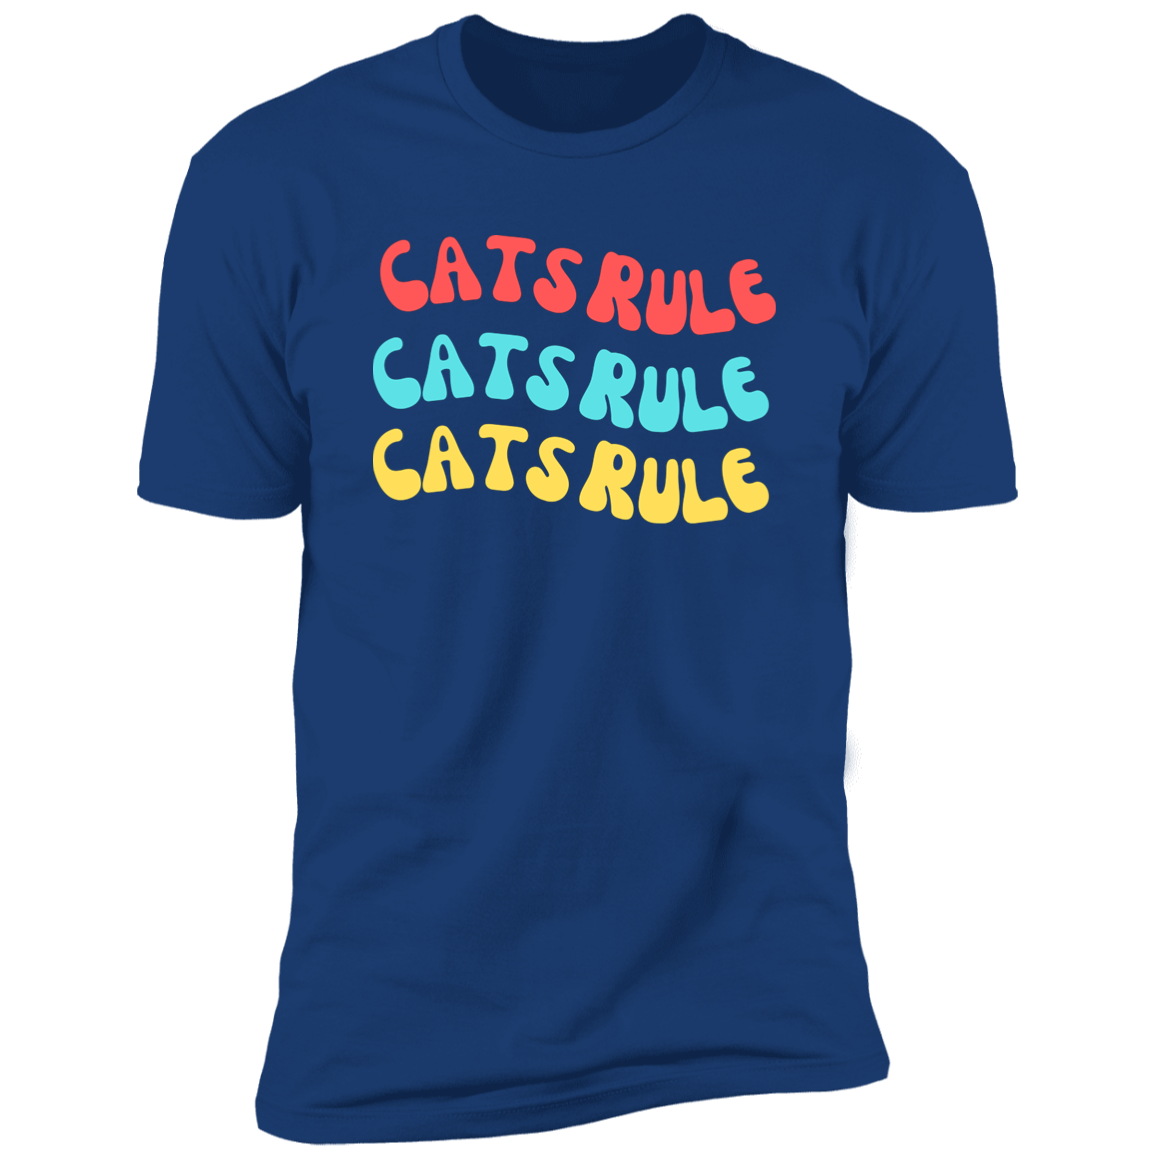 Cats Rule T-shirt, Cat Shirt for humans, in royal blue